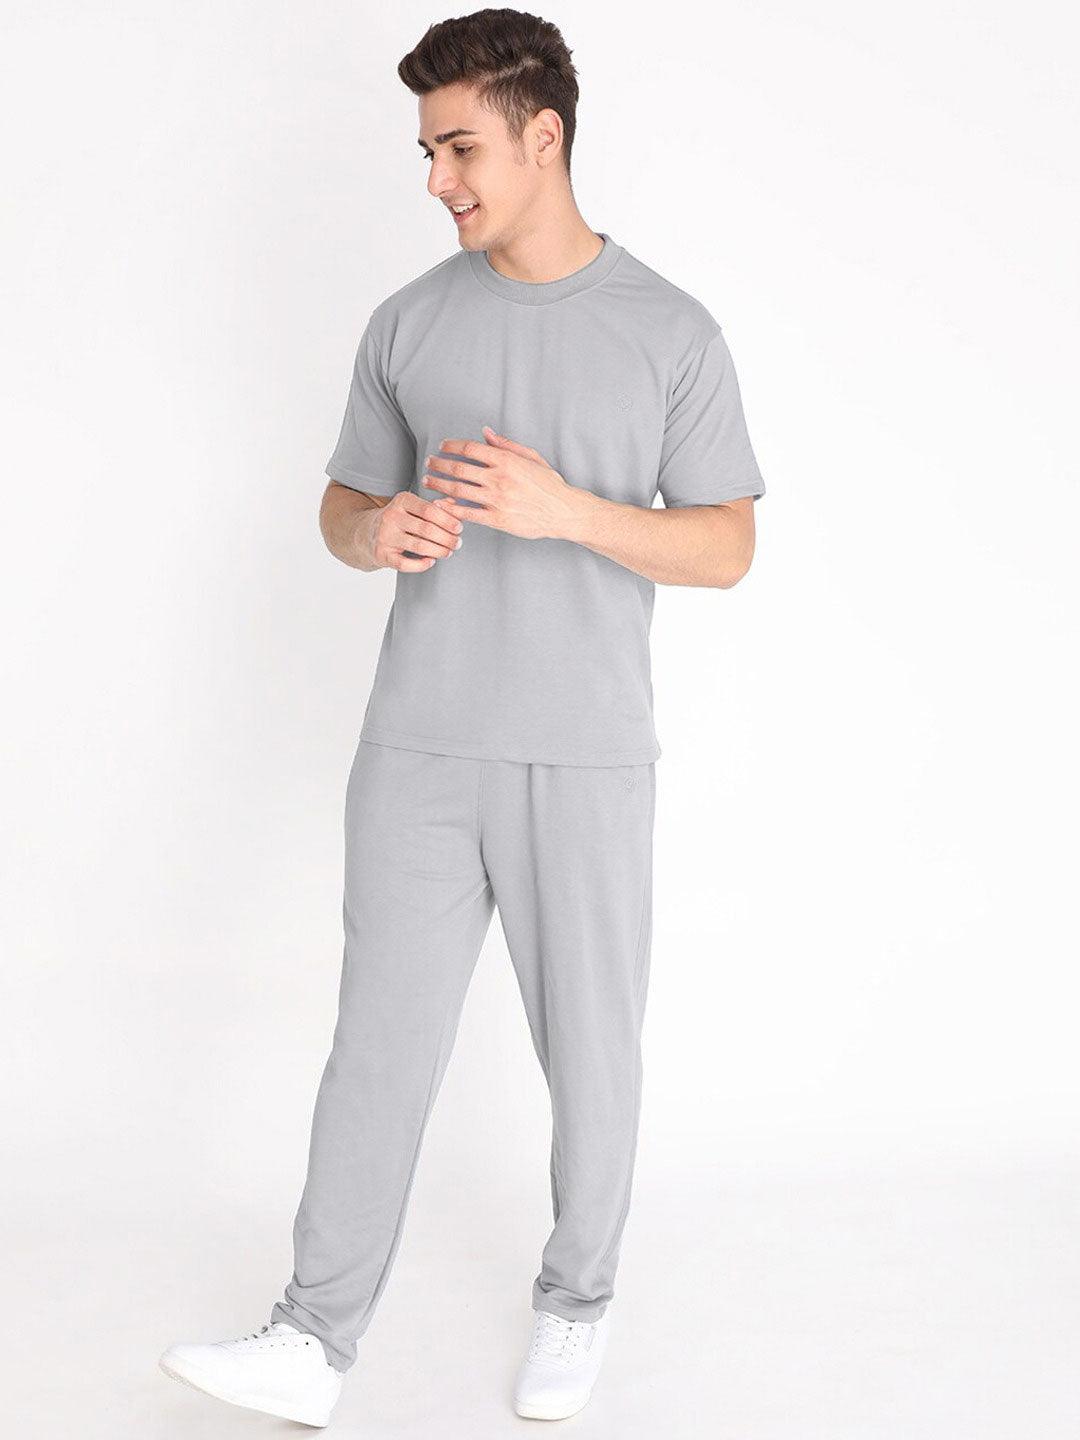 Mens Full Track Suits in Gray Colour - Aadhitri